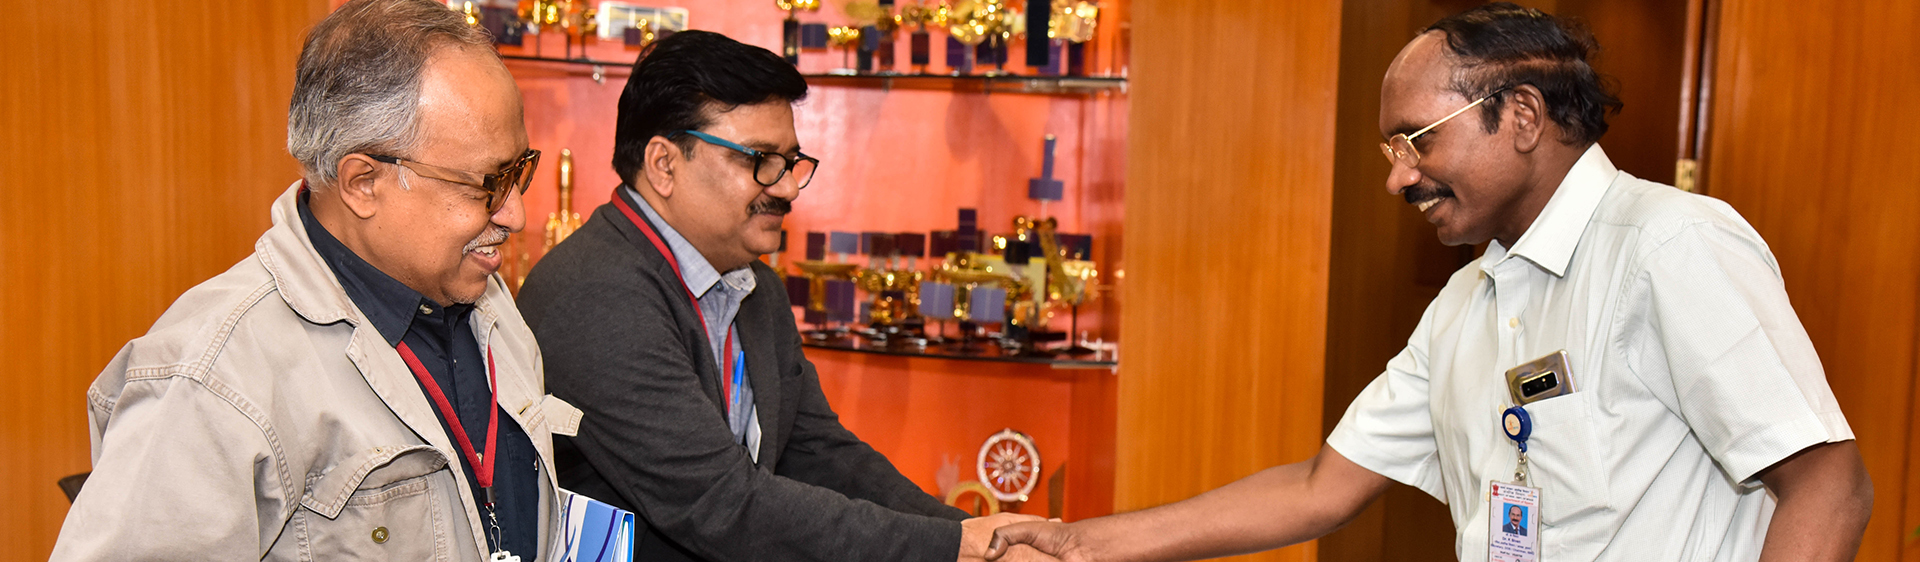 Meeting and interaction with Dr. K Sivan, chairman ISRO at ISRO Headquarters, Bangalore